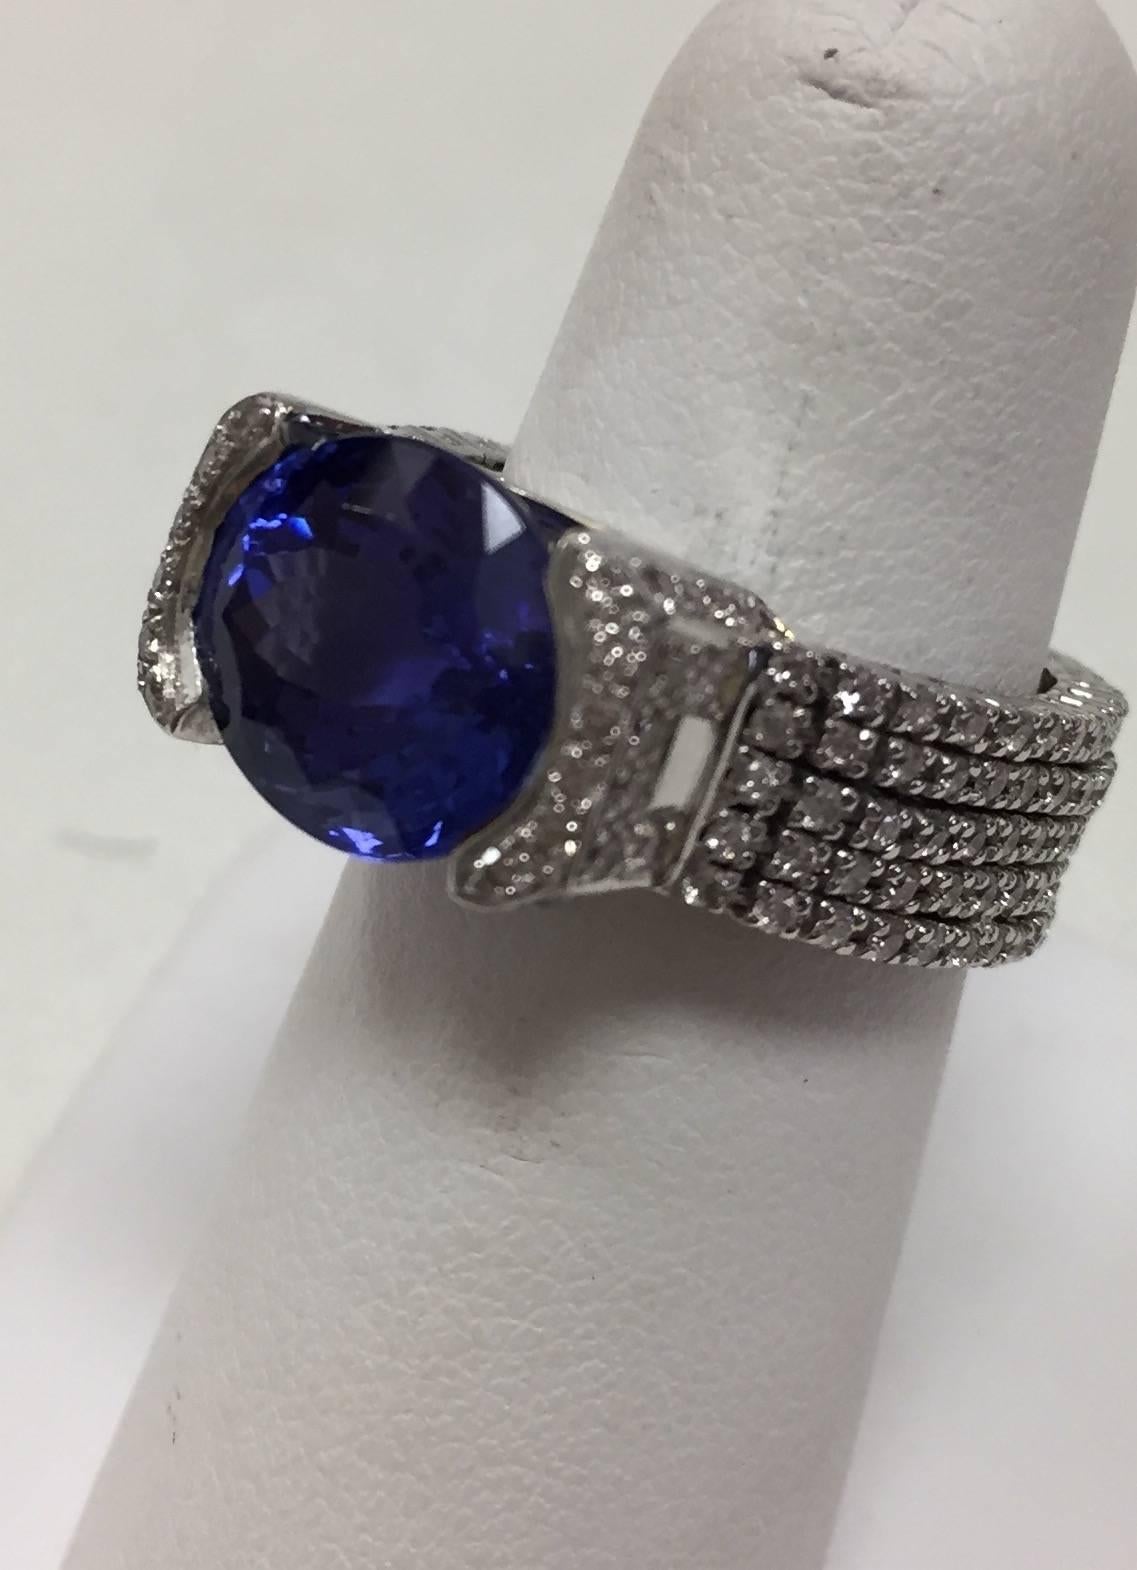 Larger tanzanites are getting harder to find!  This oval, east-west set, beauty weighs 7.34 carats.  A most unusual 18 karat white gold setting sets off the main stone to perfection.  Two diamond  bezels present the stone which is set in a diamond